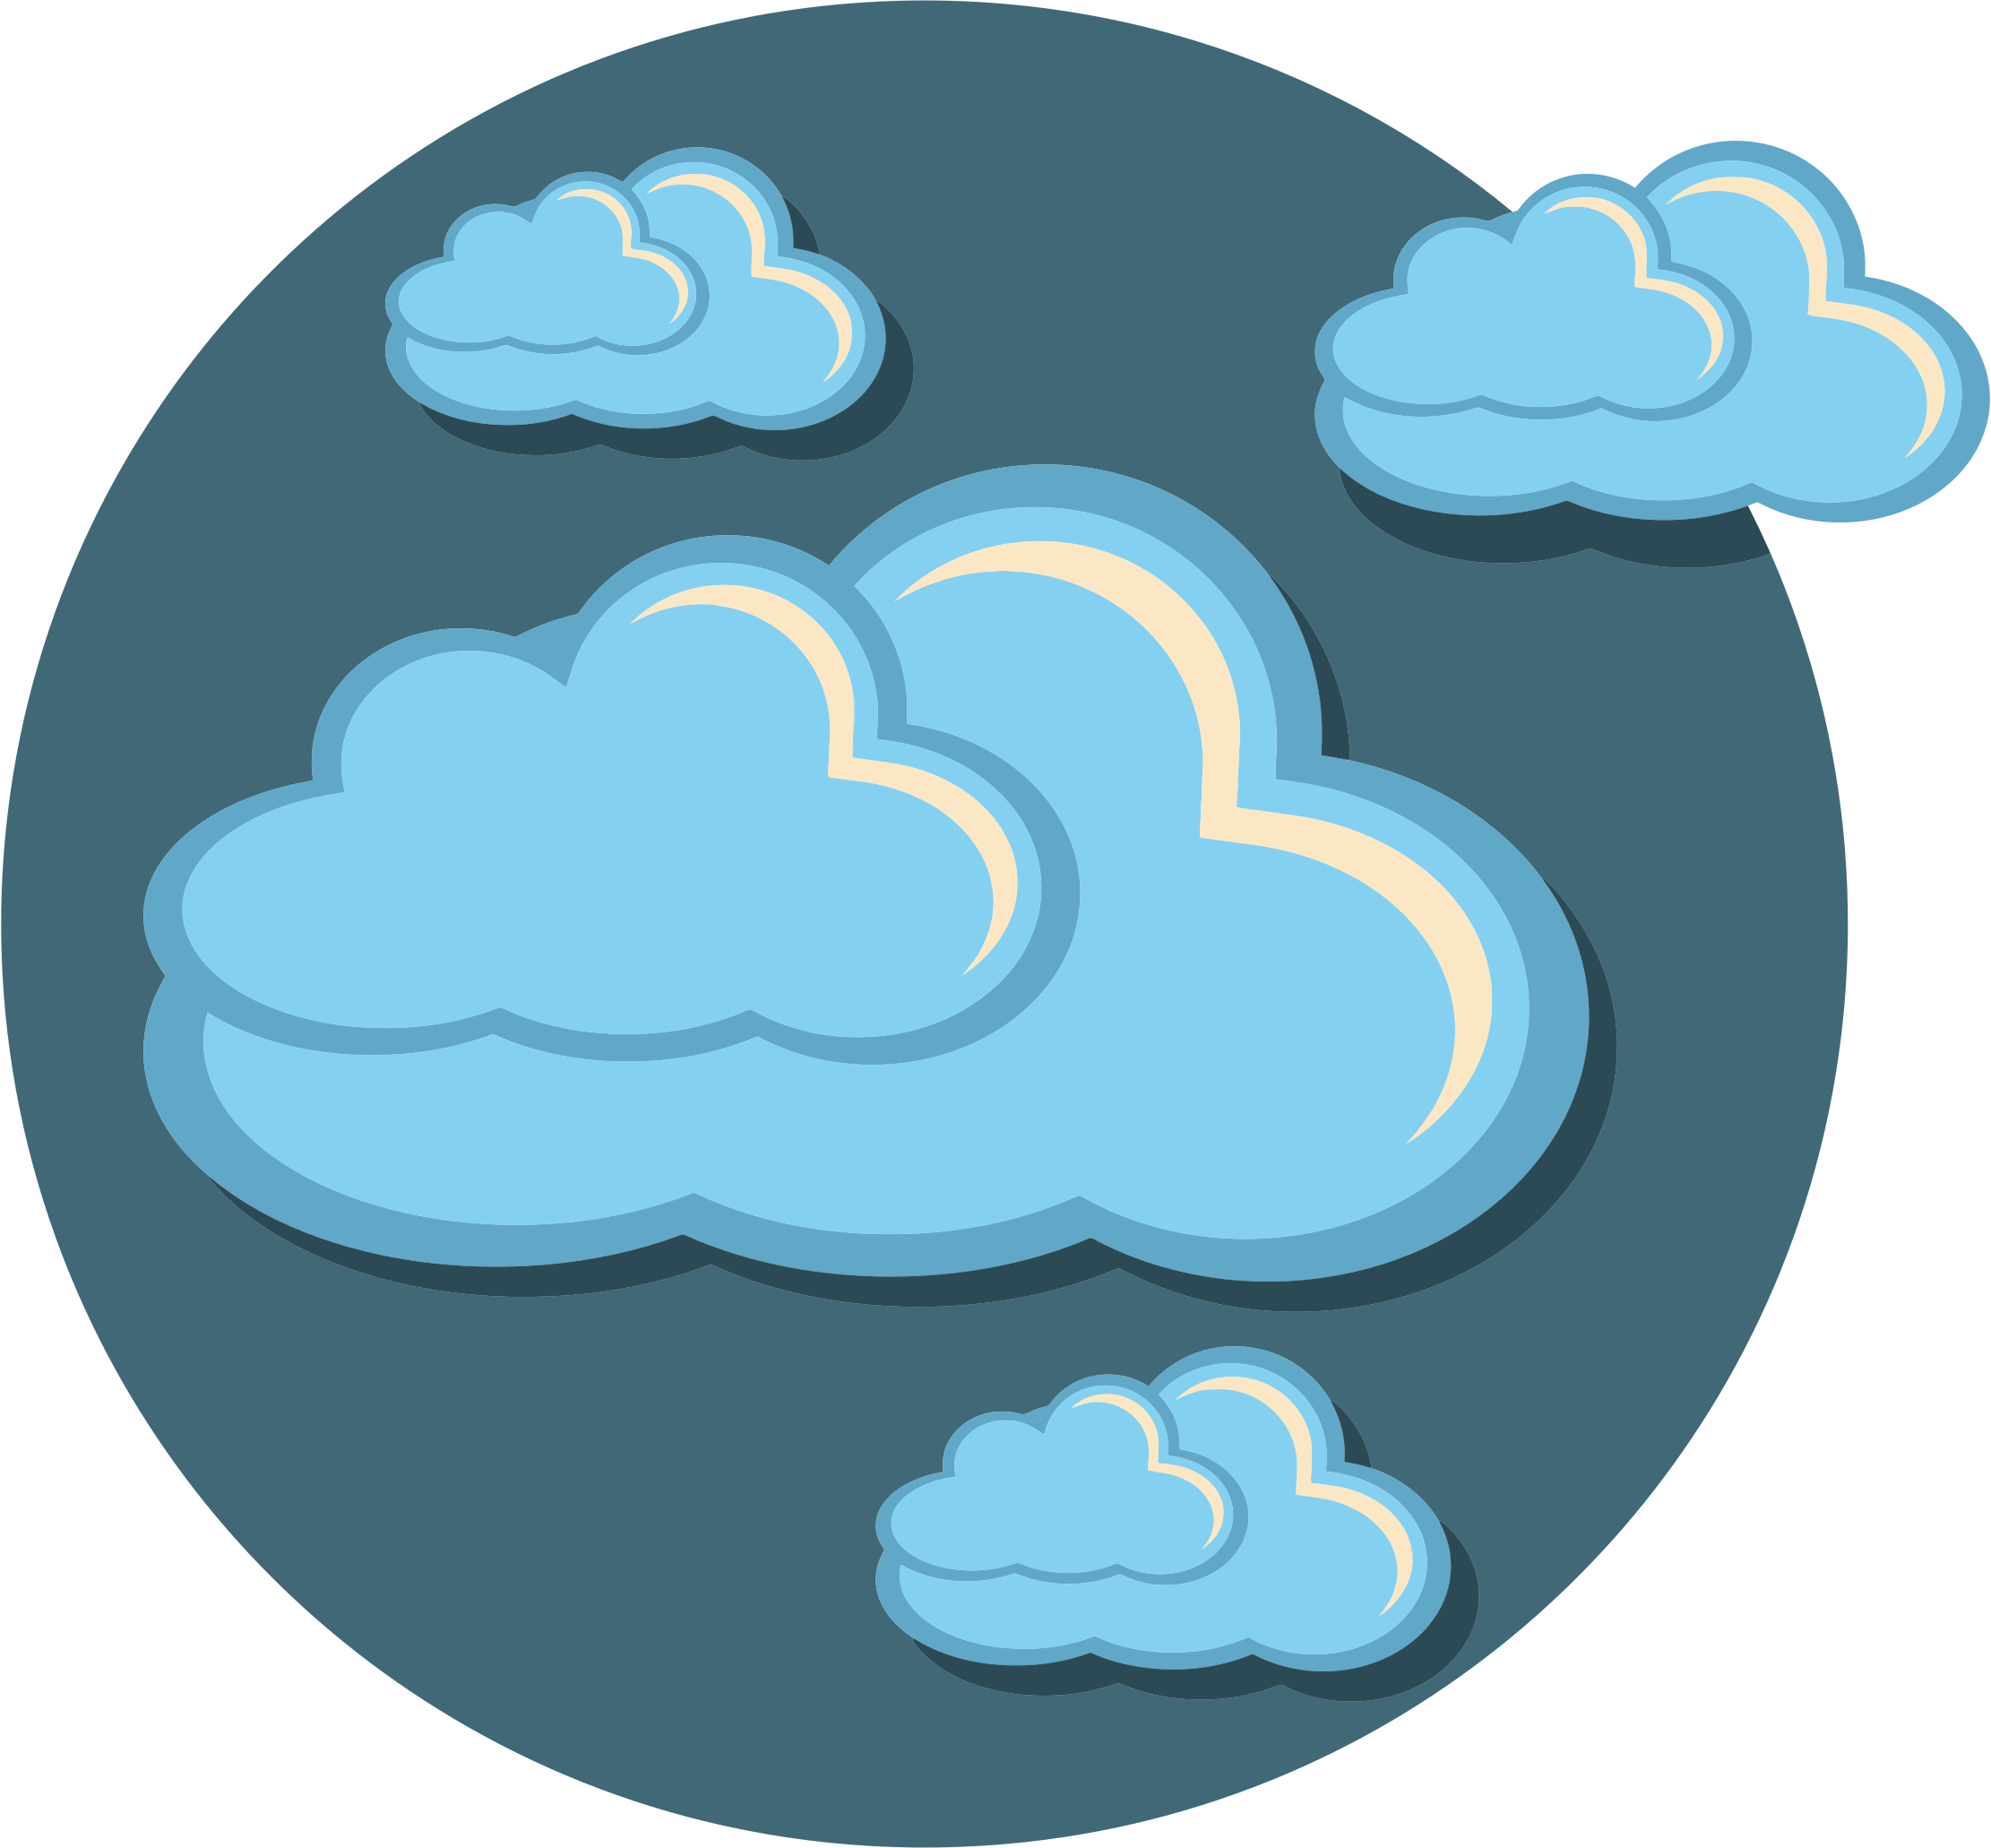 Storm Clouds Icon - Small Transparent Storm Cloud - Full Size PNG ...